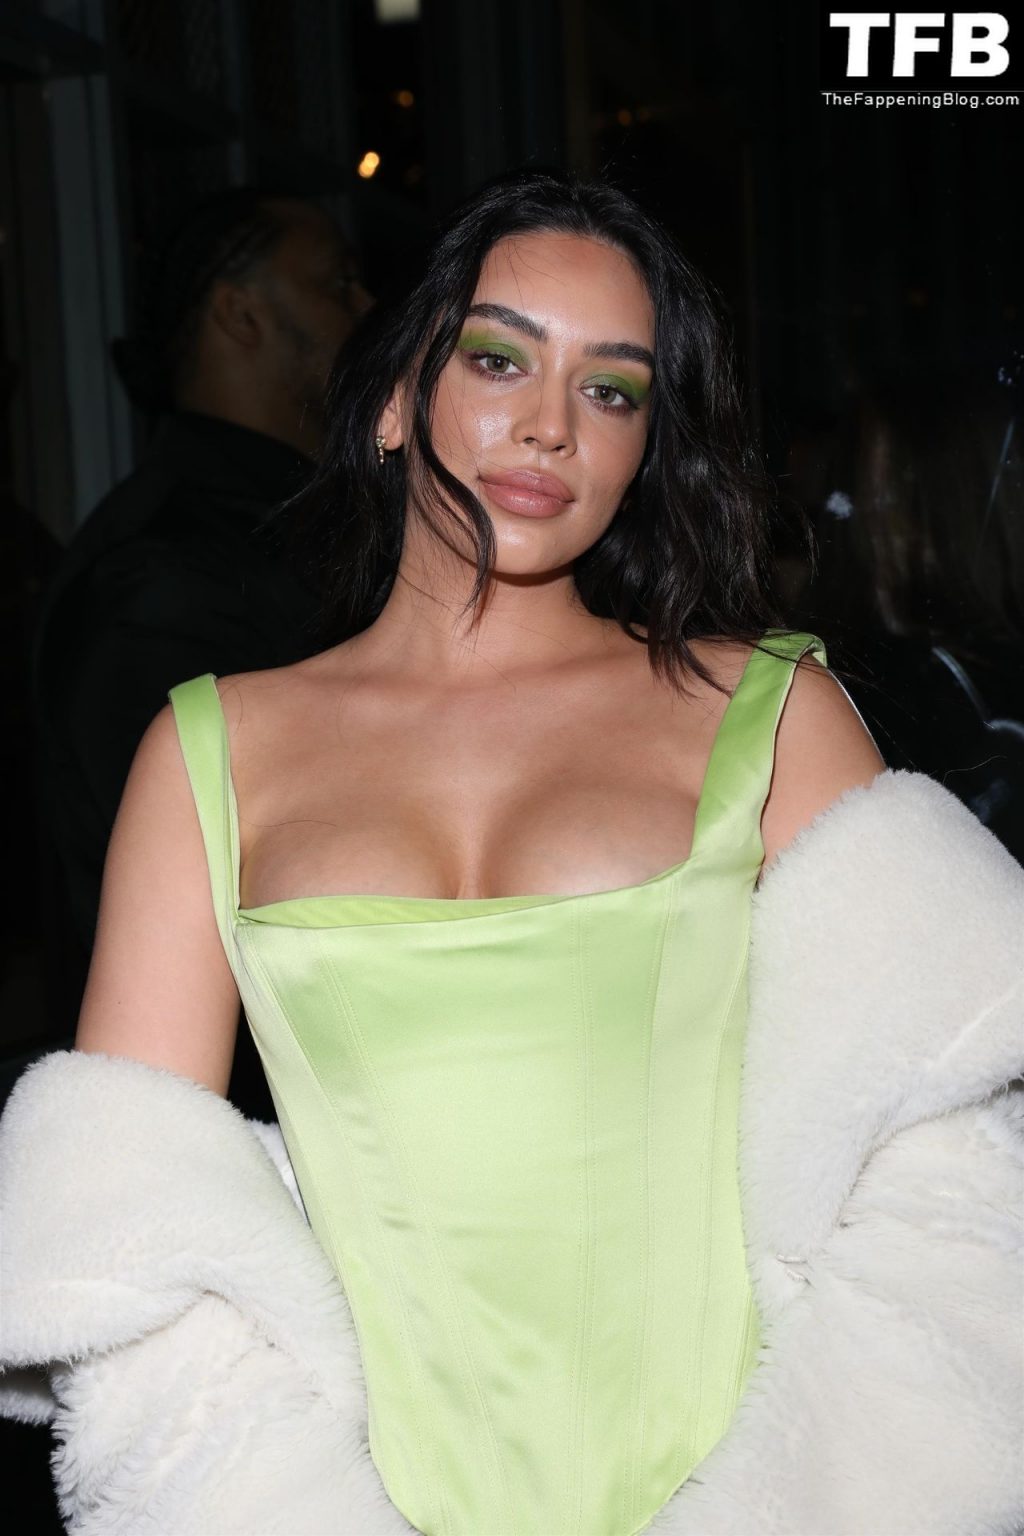 Janice Joostema Displays Her Sexy Boobs at the PrettyLittleThing Fashion Show (11 Photos)